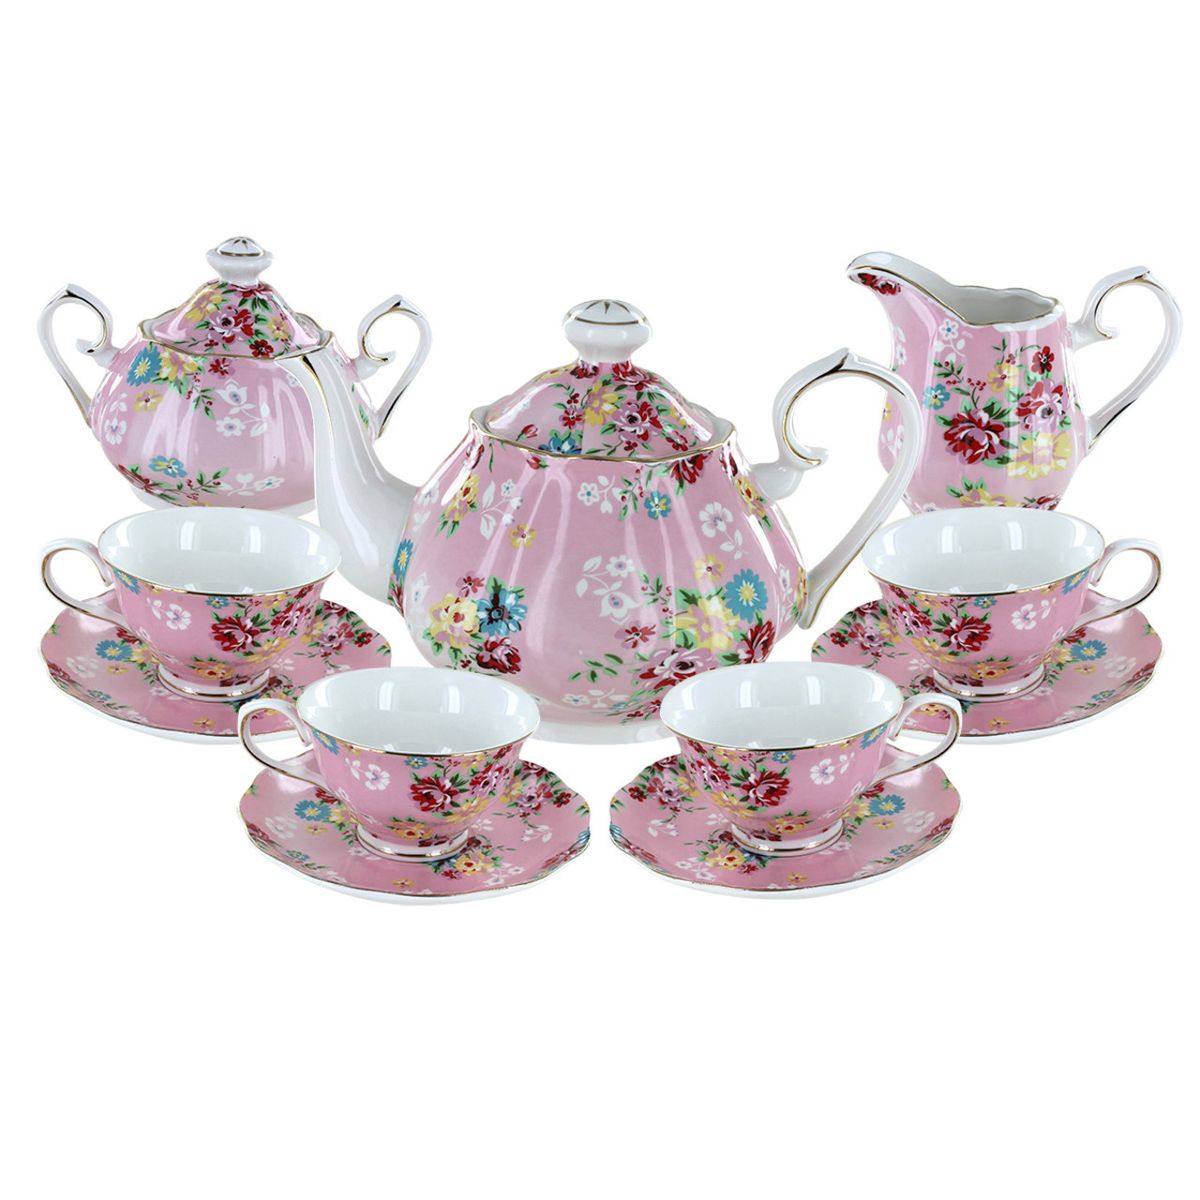 Ladies Auxiliary Themes and Tea